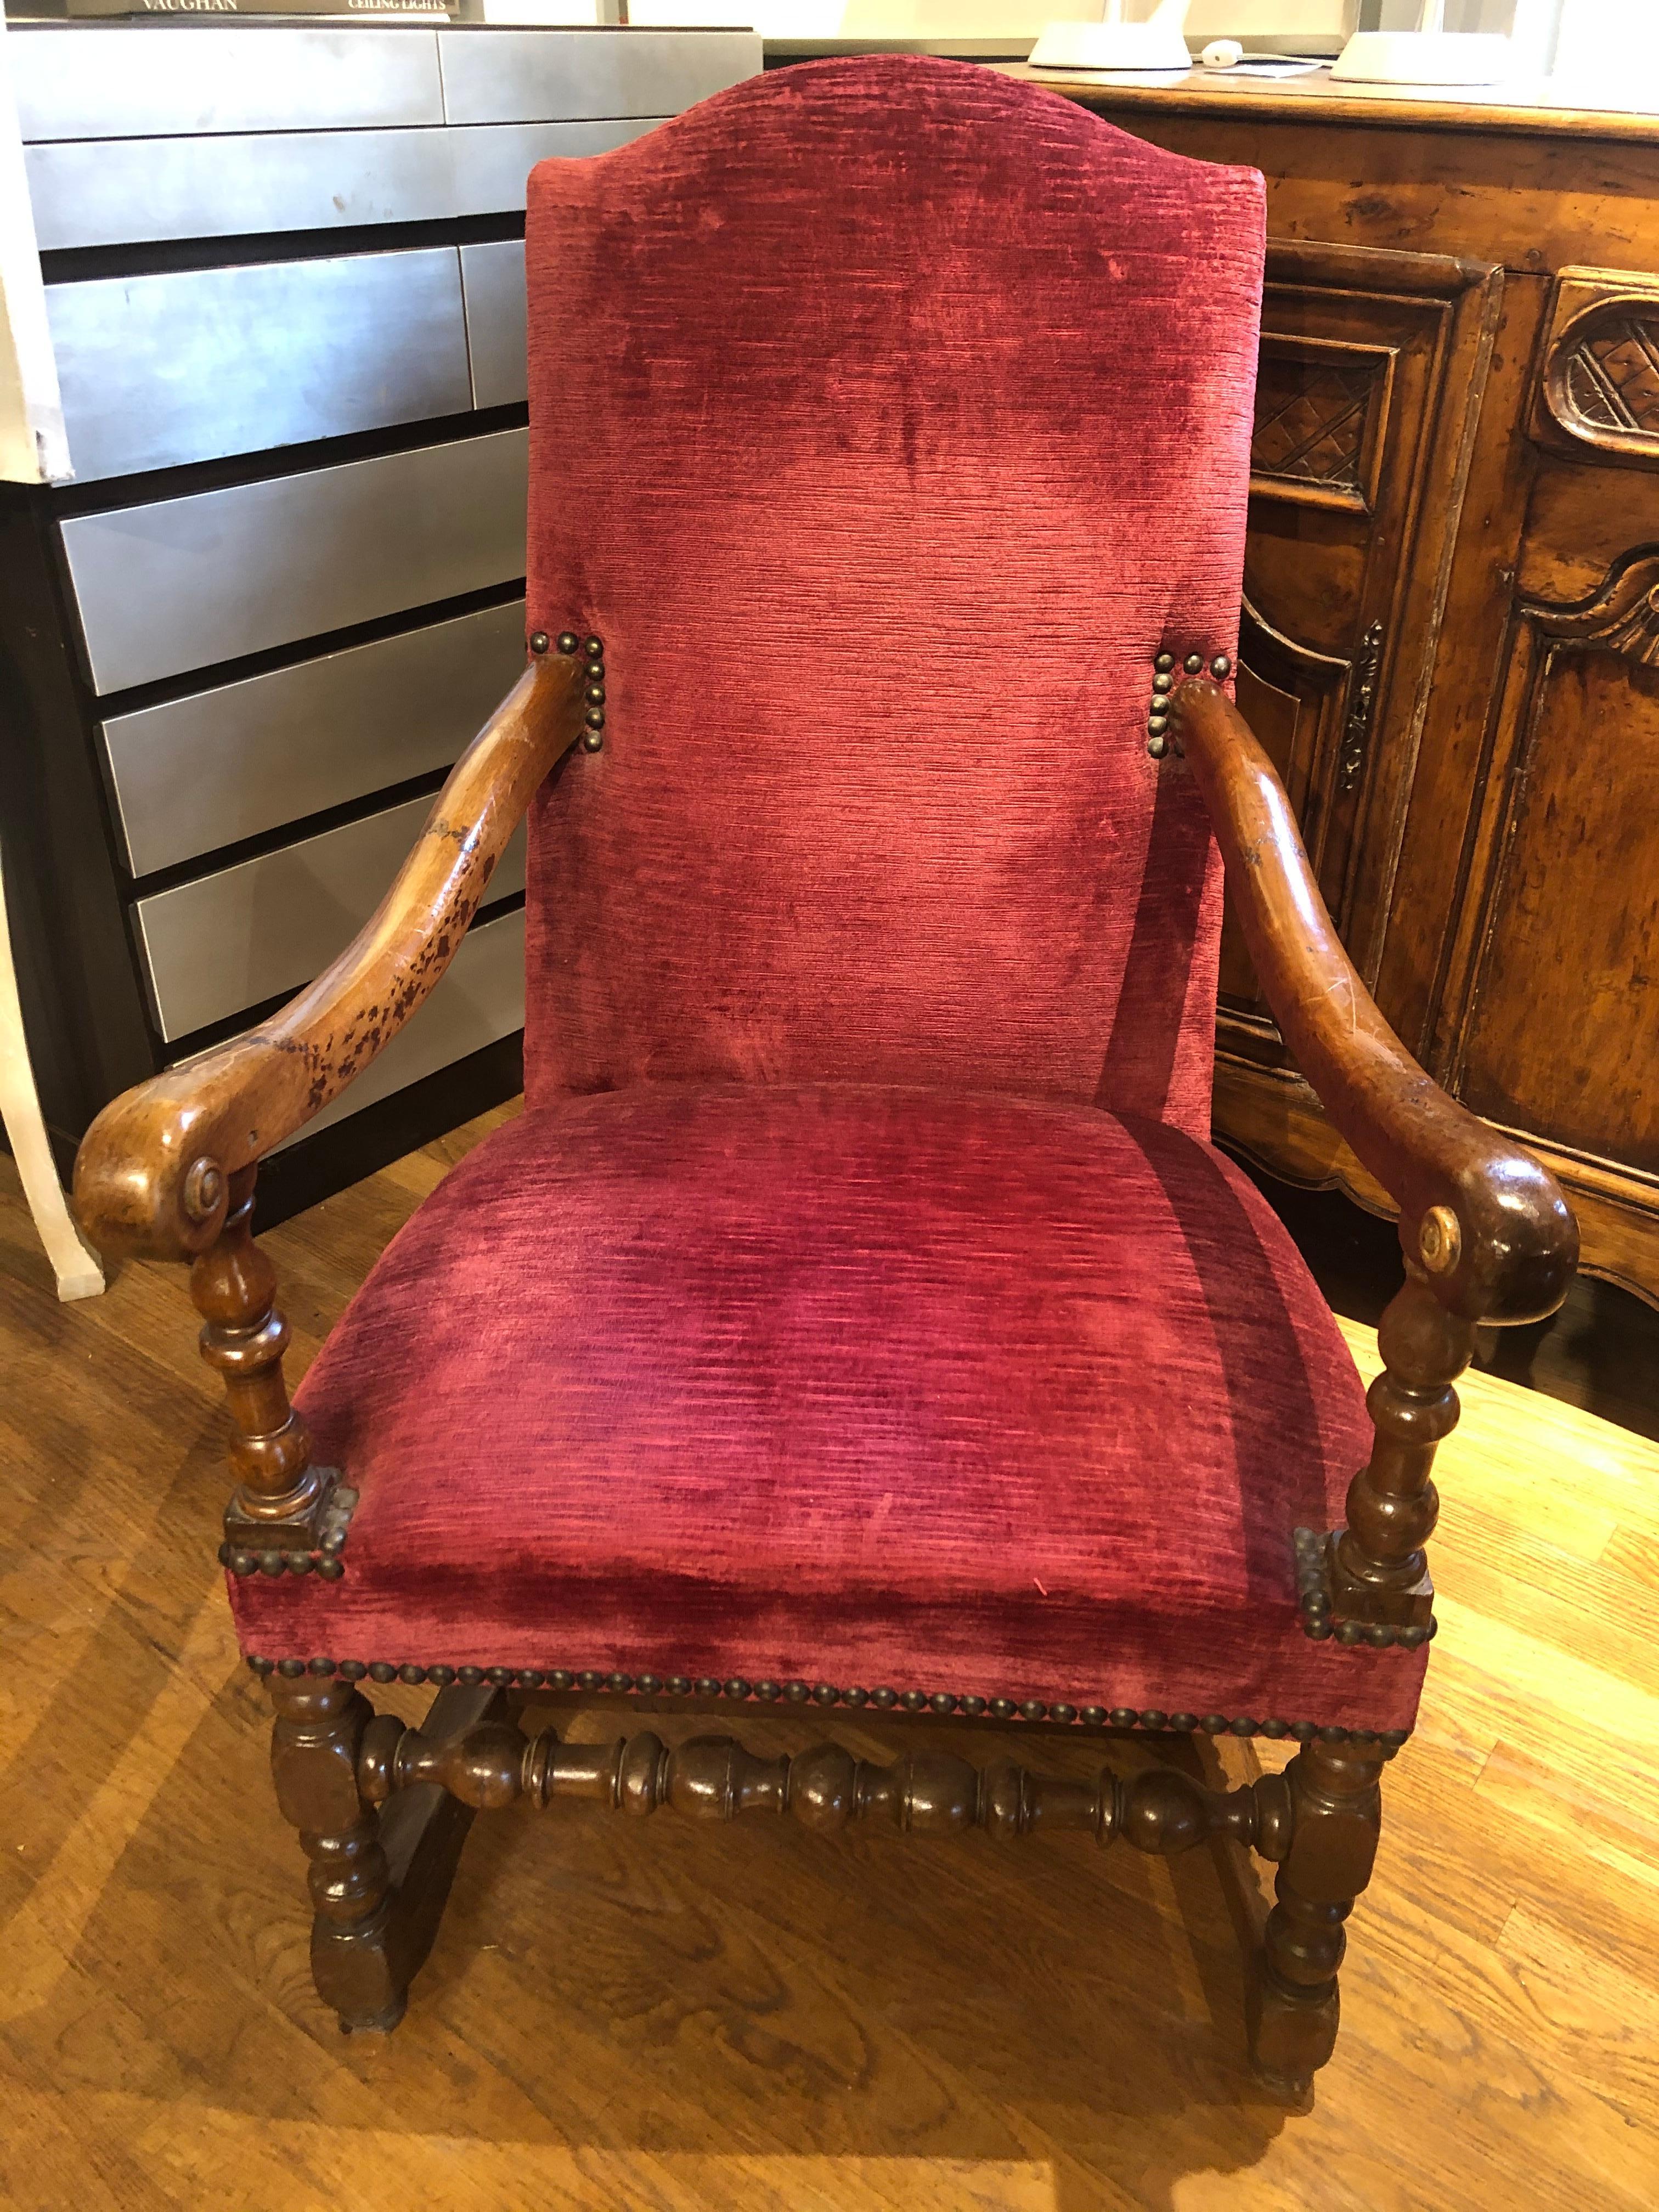 Beautiful 17th century Baroque French Provincial armchair upholstered in a rich raspberry red velvet. Arched back, sweeping arms and turned legs with stretchers. This lovely armchair is made of a deeply patinated walnut with lustrous color.